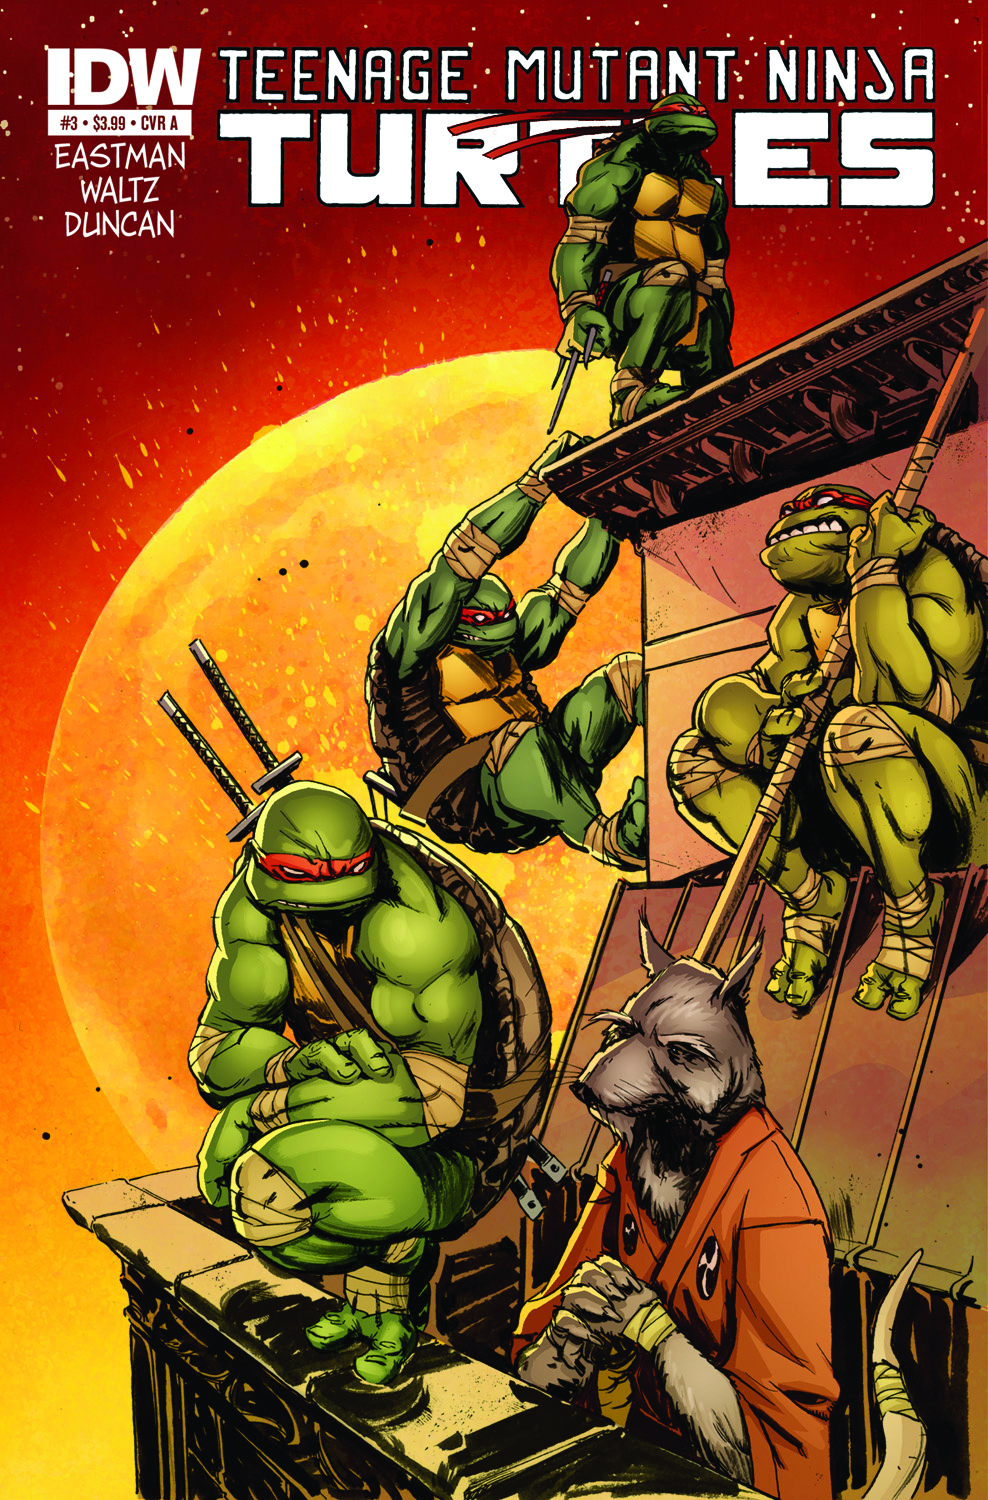 TMNT ONGOING #3